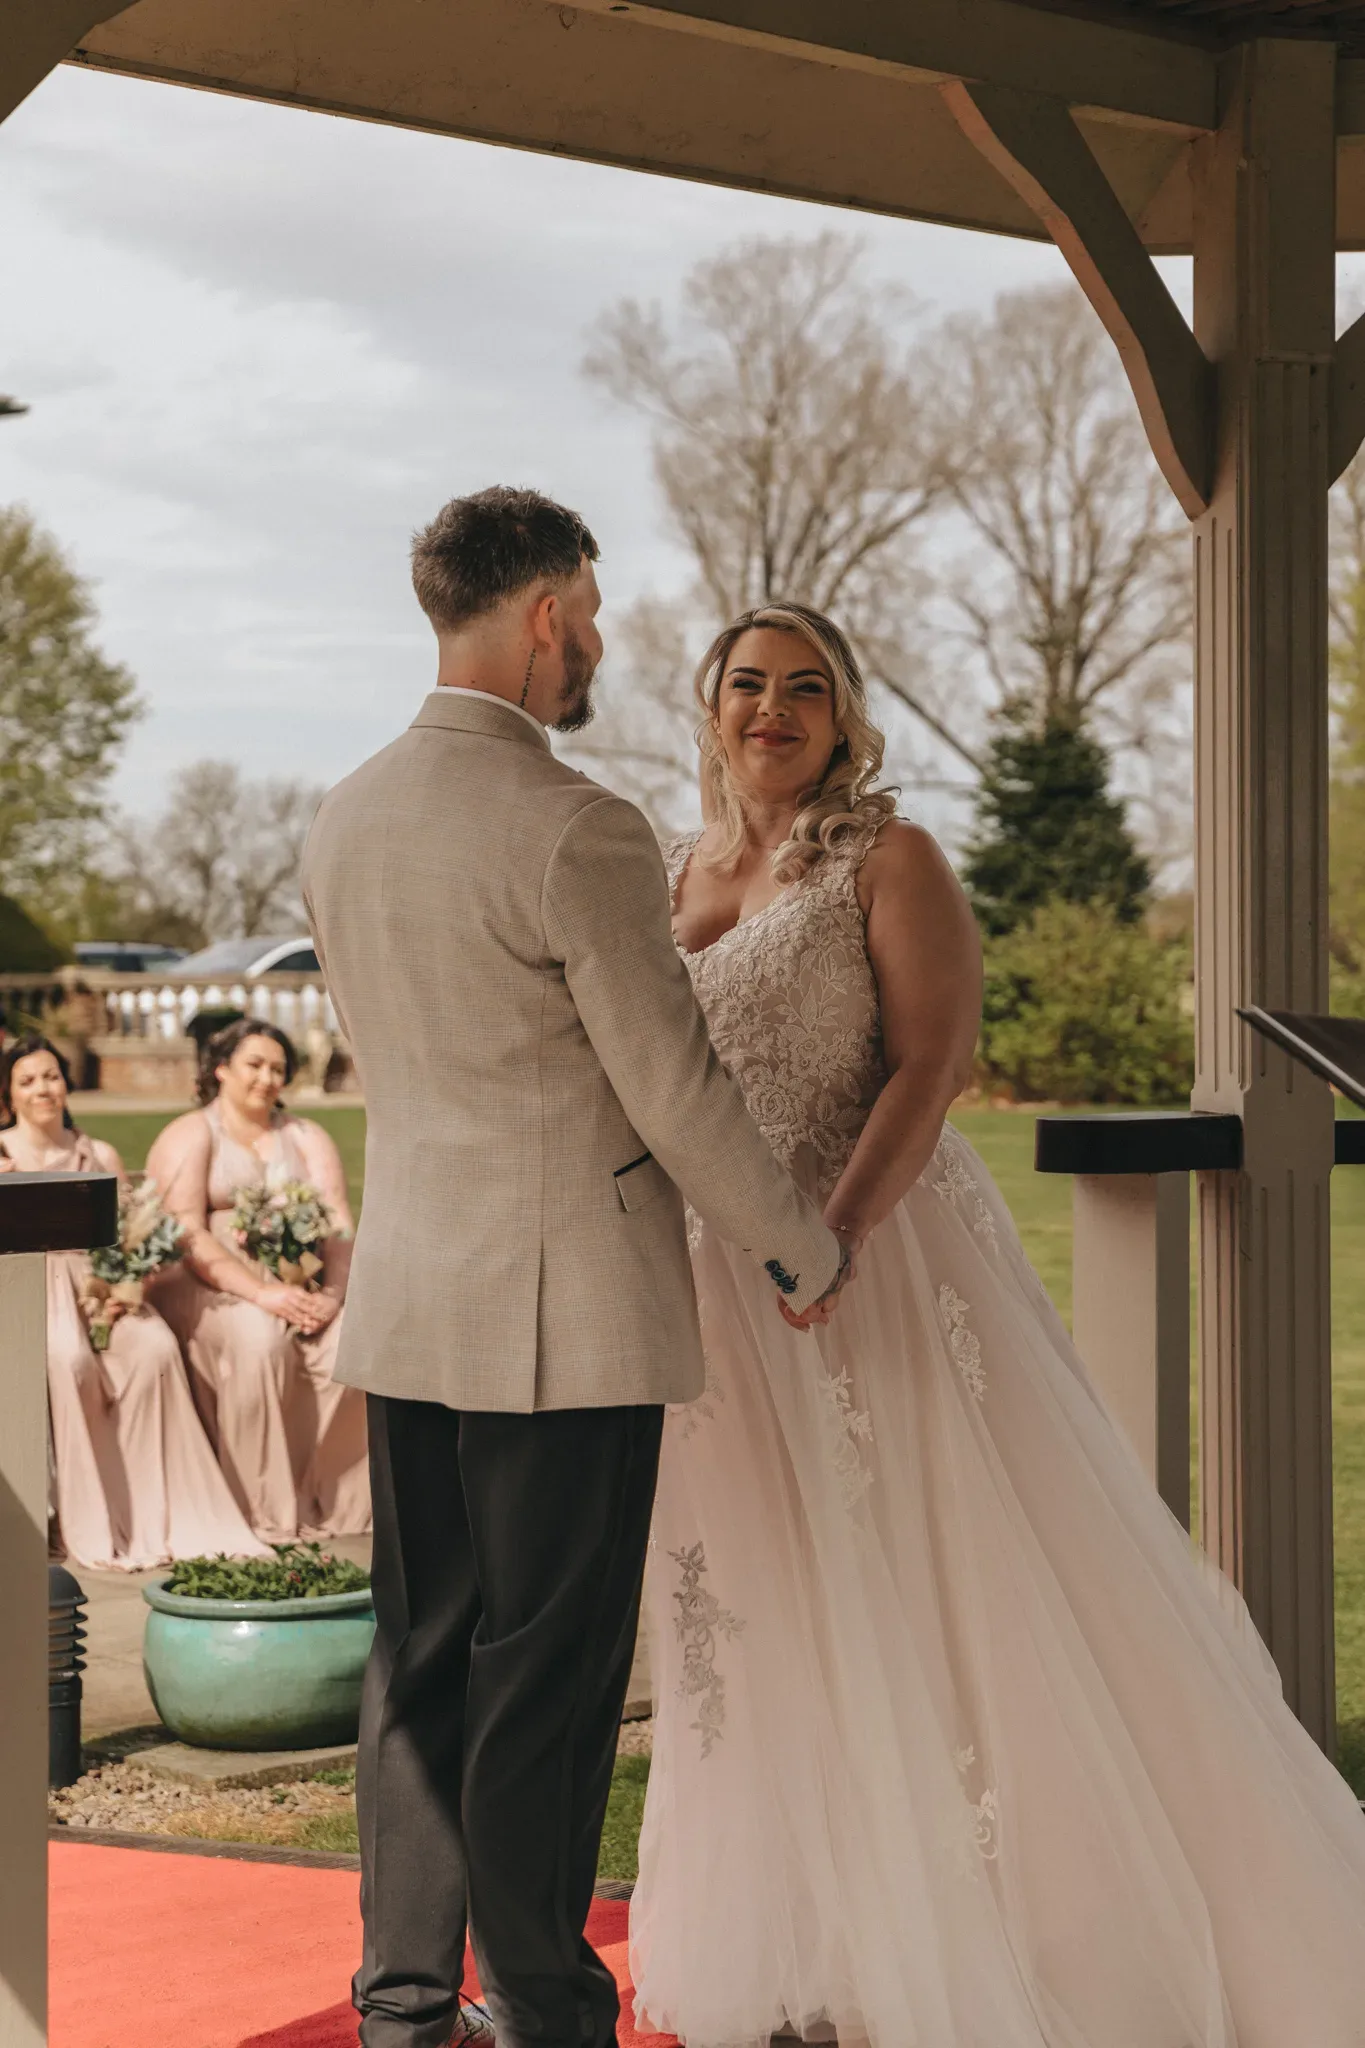 A bride and groom stand under a wooden gazebo, holding hands and smiling at each other. the bride is wearing a detailed white wedding dress, and the groom is in a light grey suit. bridesmaids in pink dresses are visible in the background.